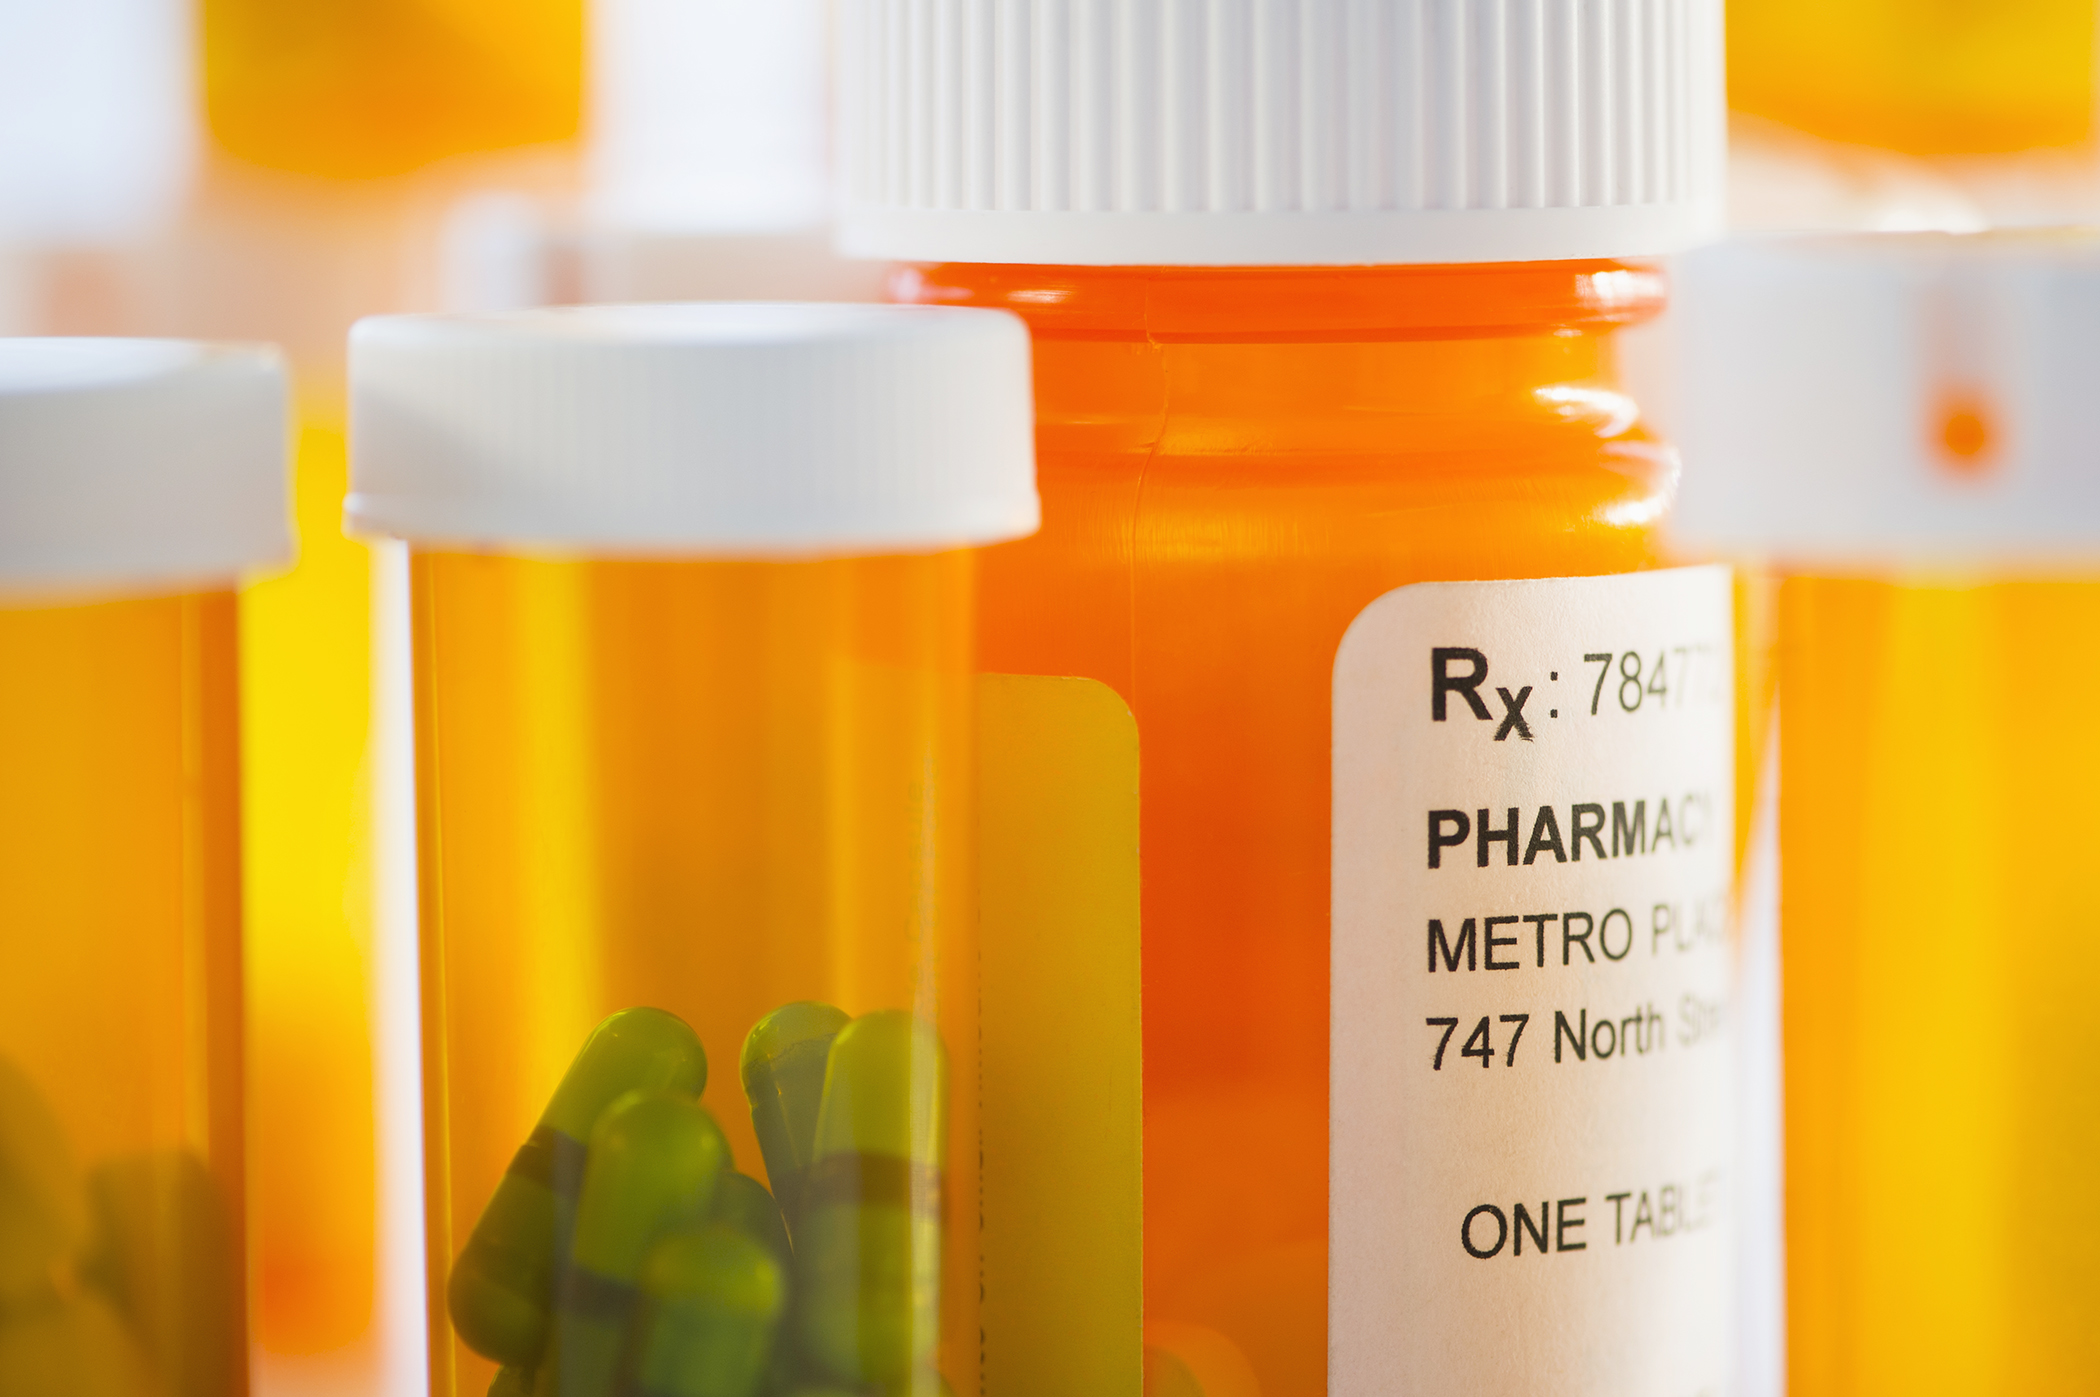 How Can I Save on Prescription Drugs in Retirement?